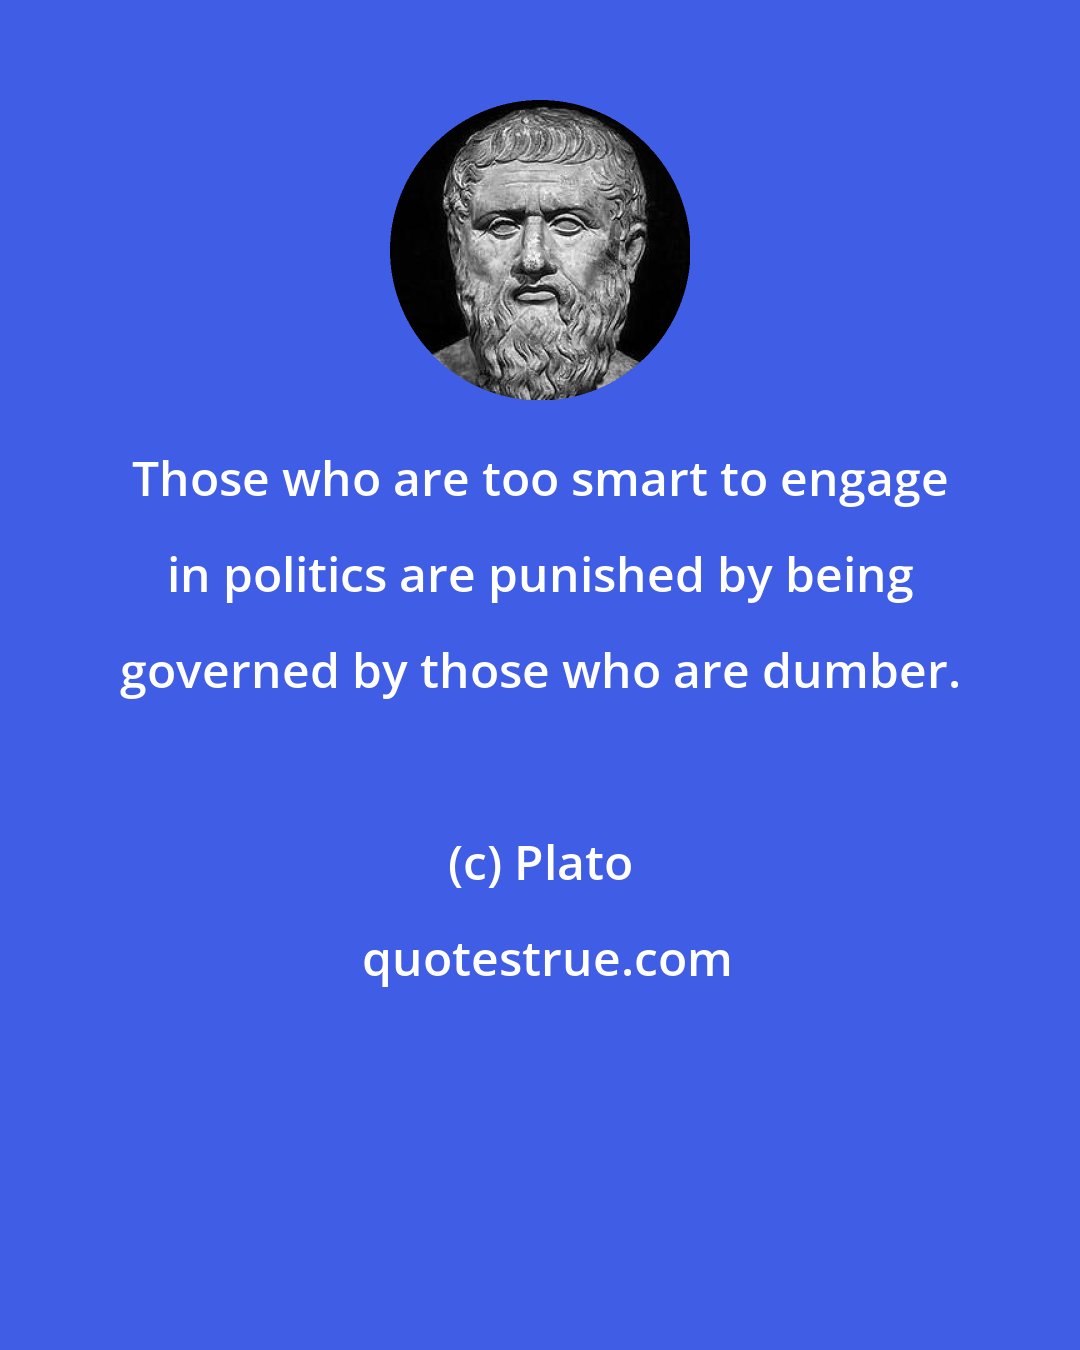 Plato: Those who are too smart to engage in politics are punished by being governed by those who are dumber.